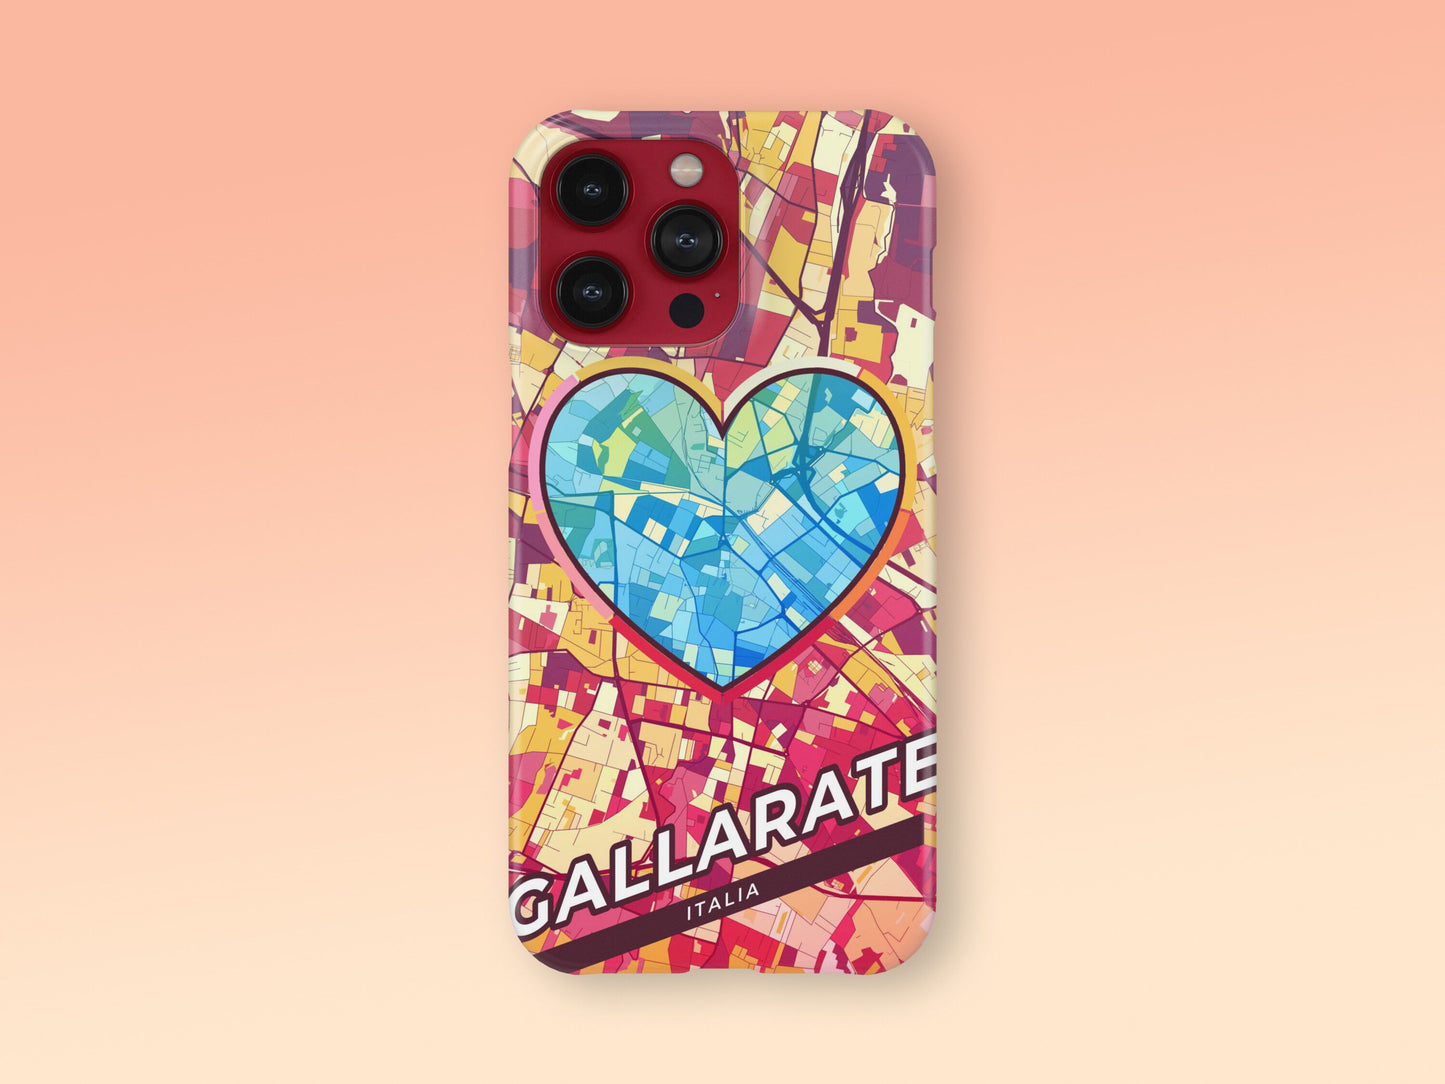 Gallarate Italy slim phone case with colorful icon. Birthday, wedding or housewarming gift. Couple match cases. 2